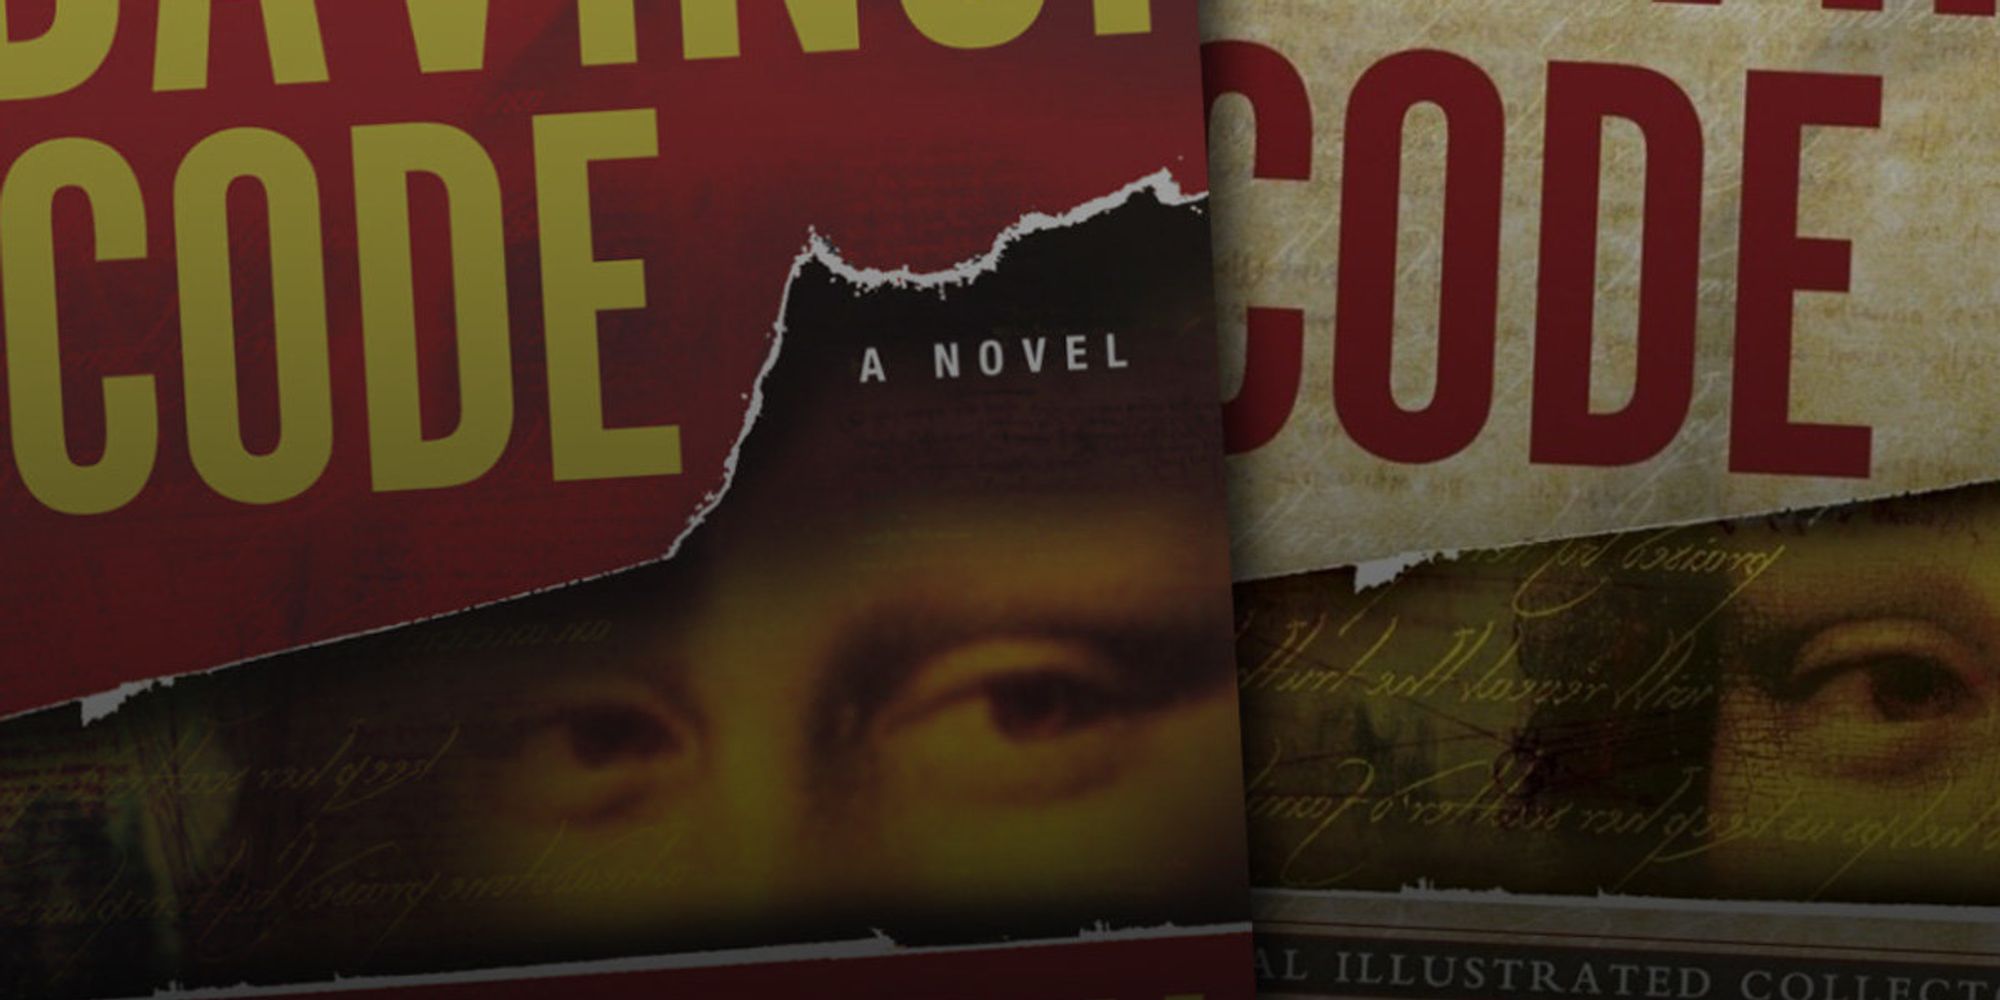 Did author Dan Brown publish any new books in 2014?